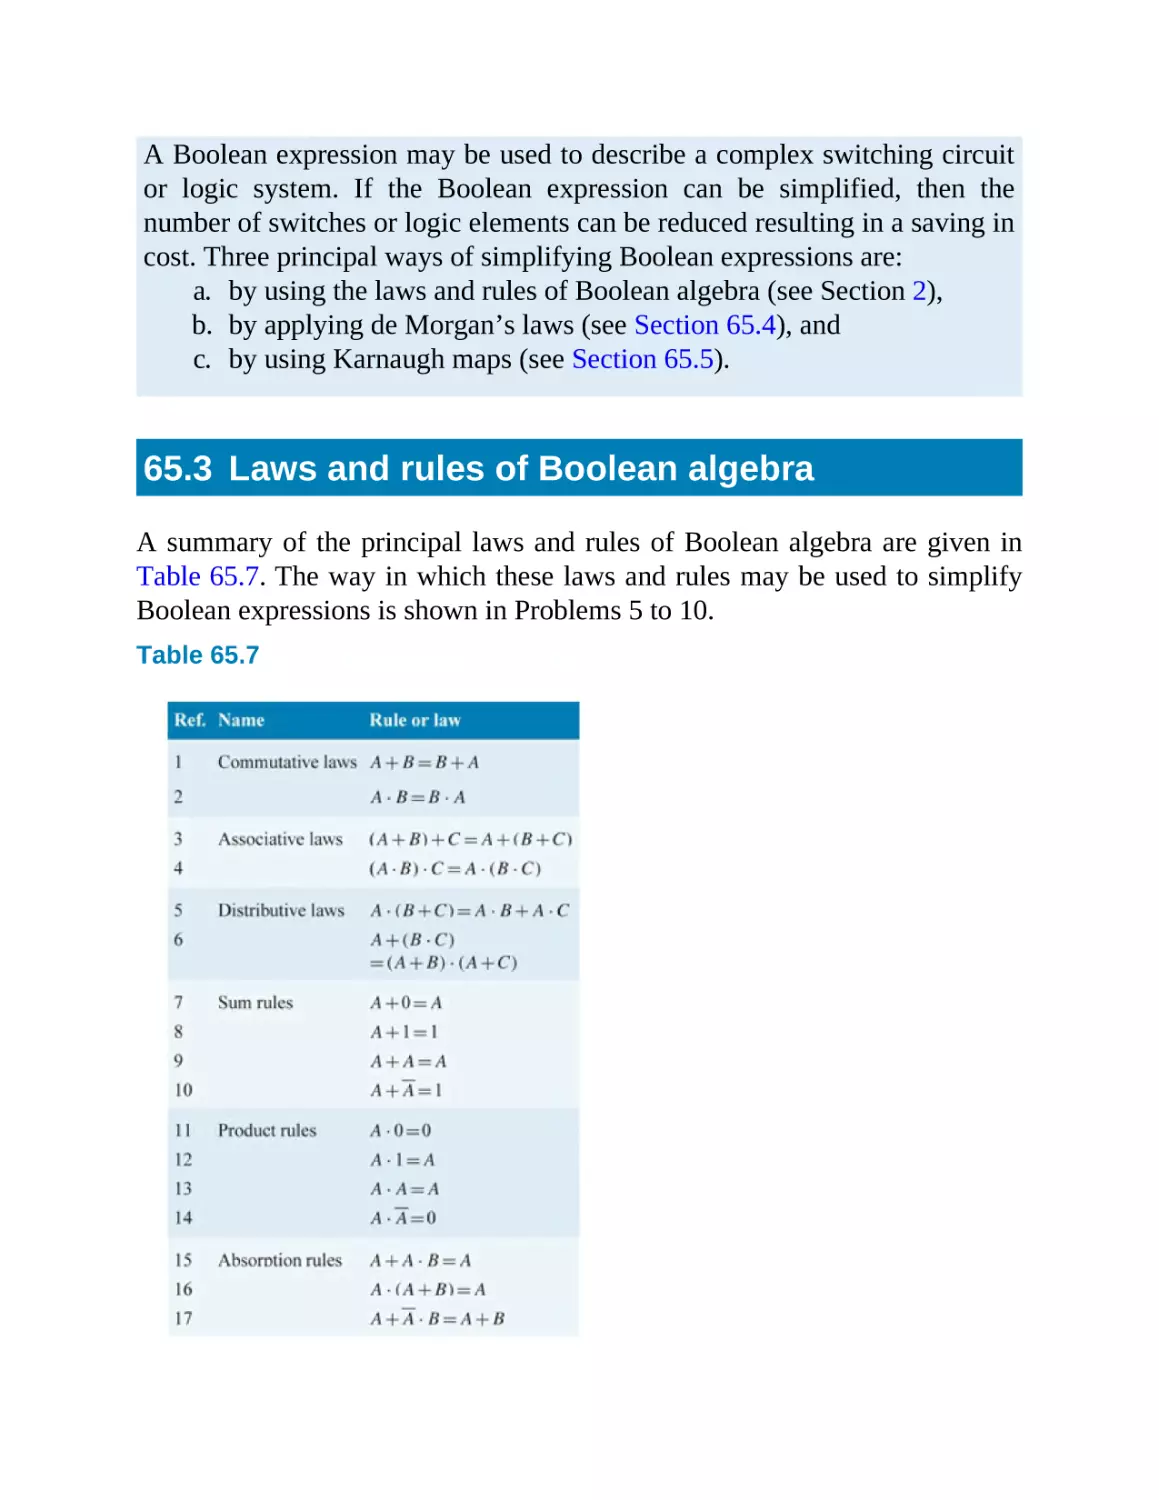 65.3 Laws and rules of Boolean algebra